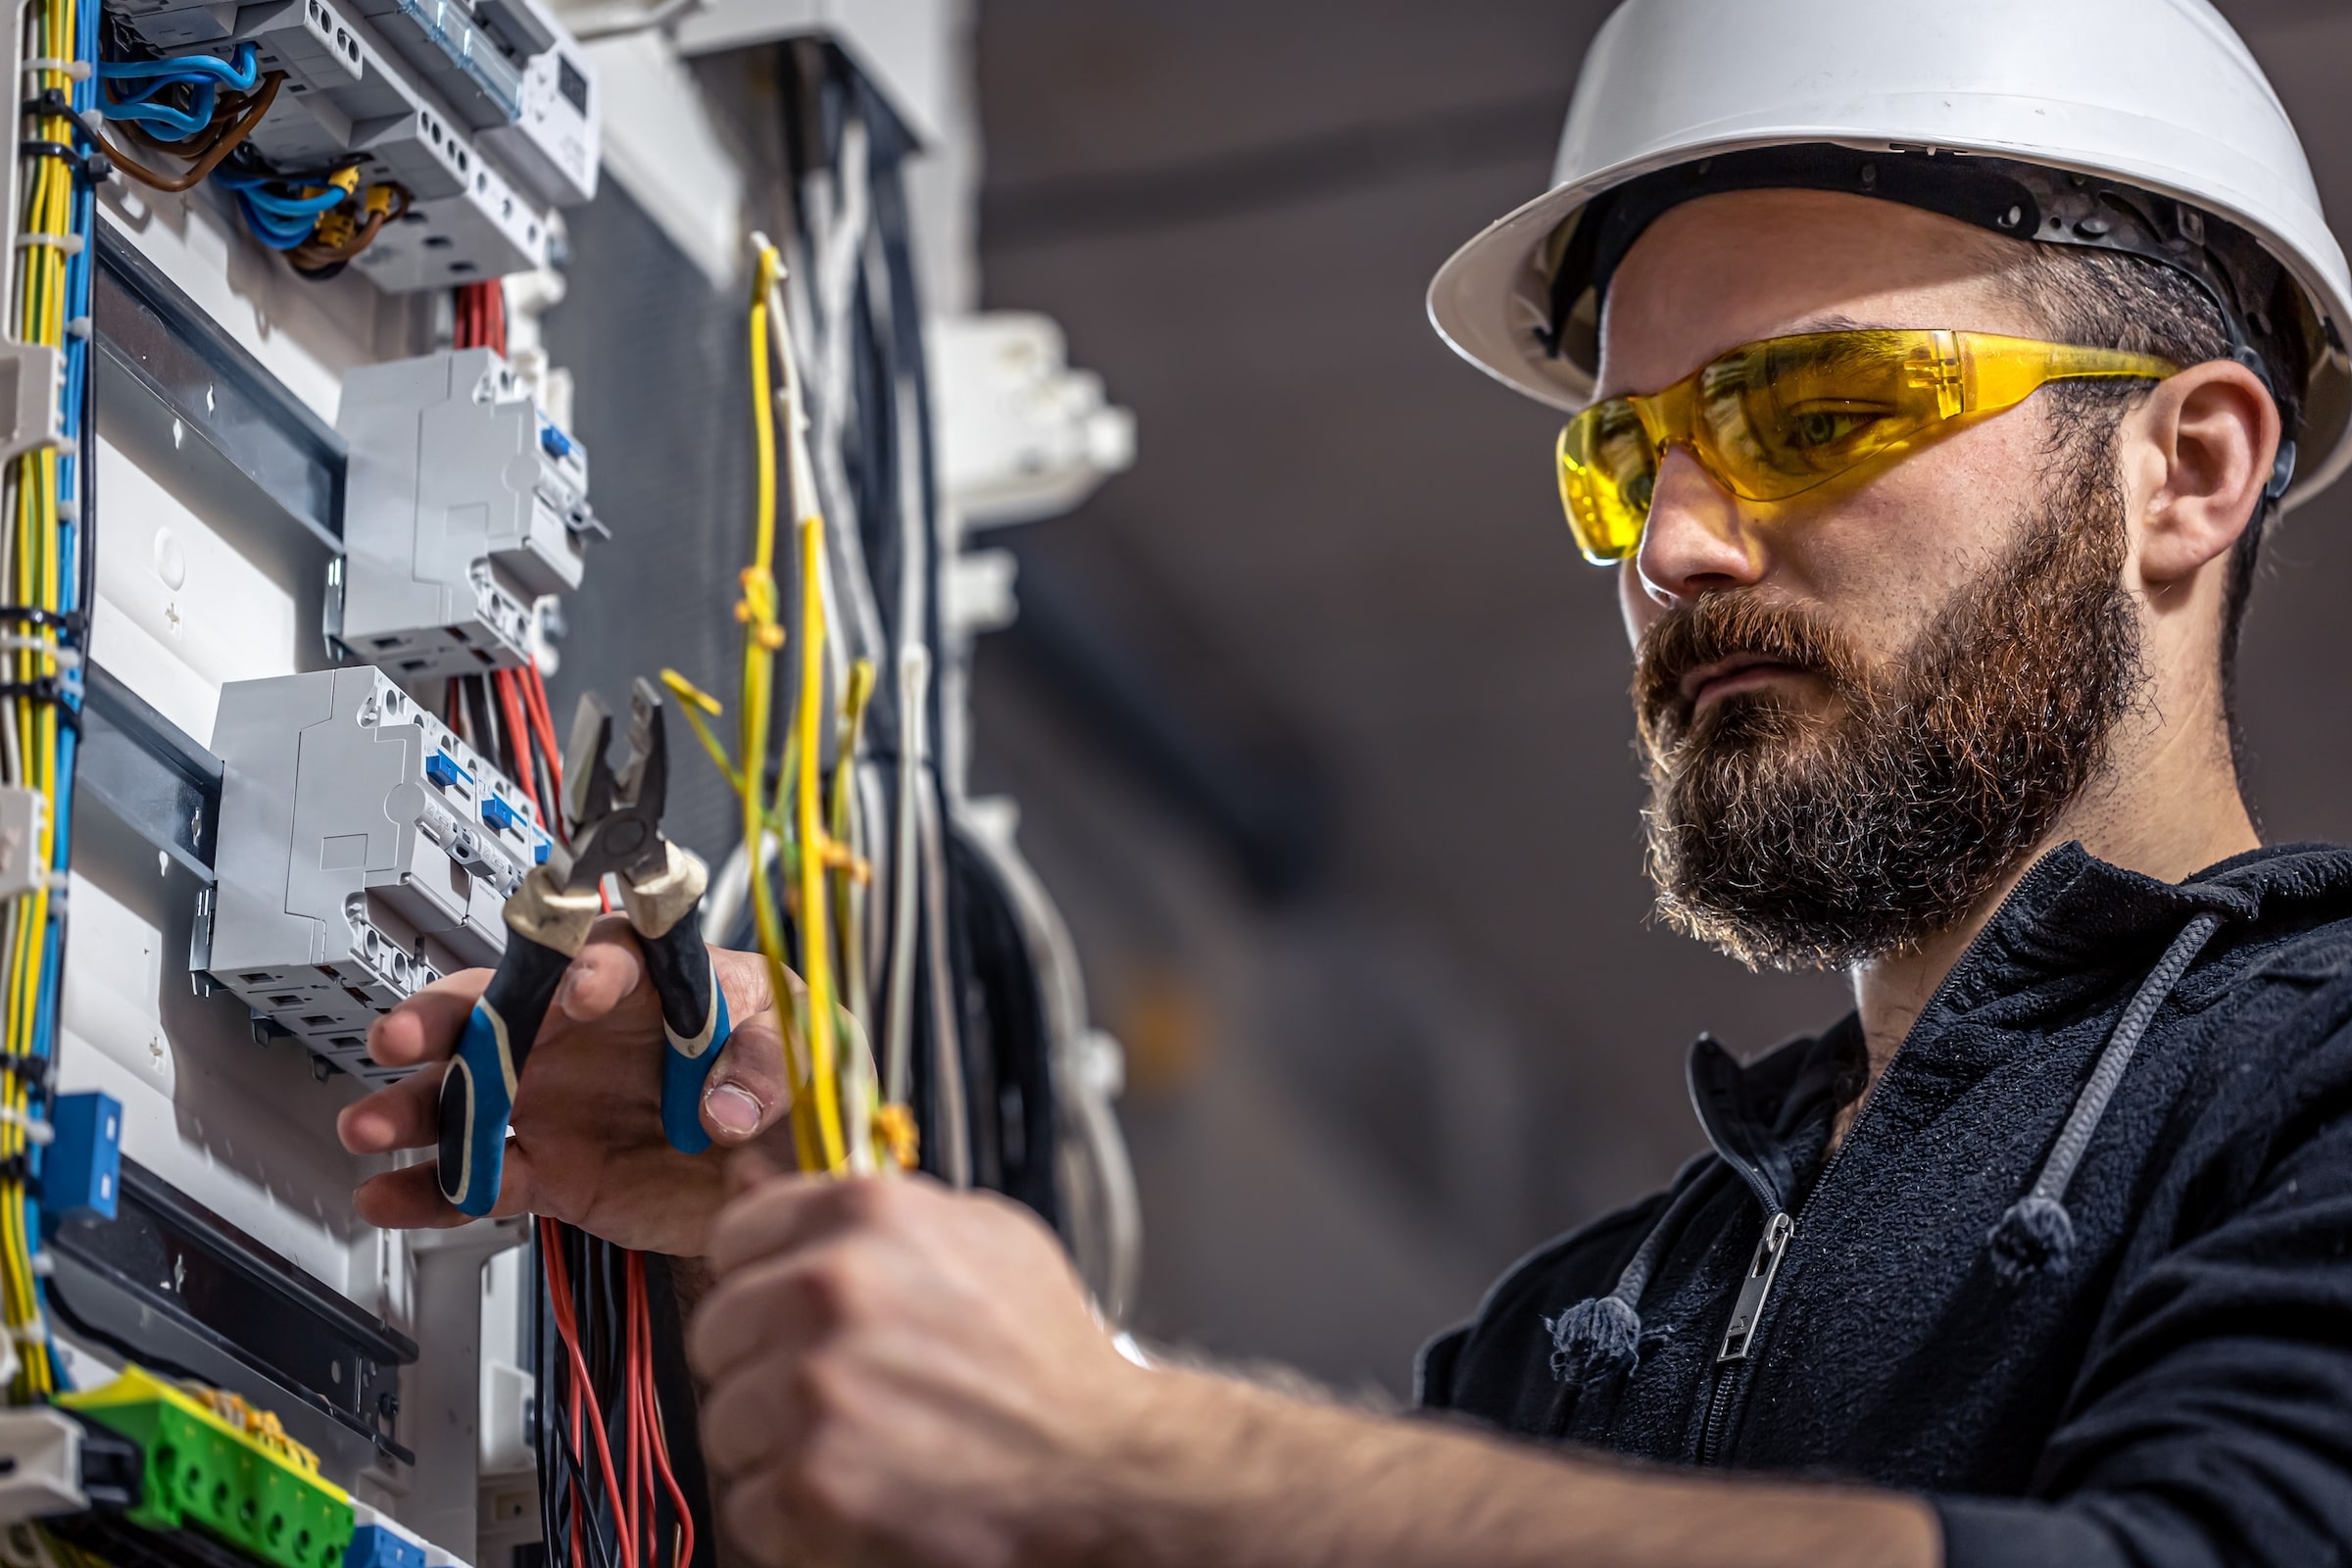 Man working on electrical components